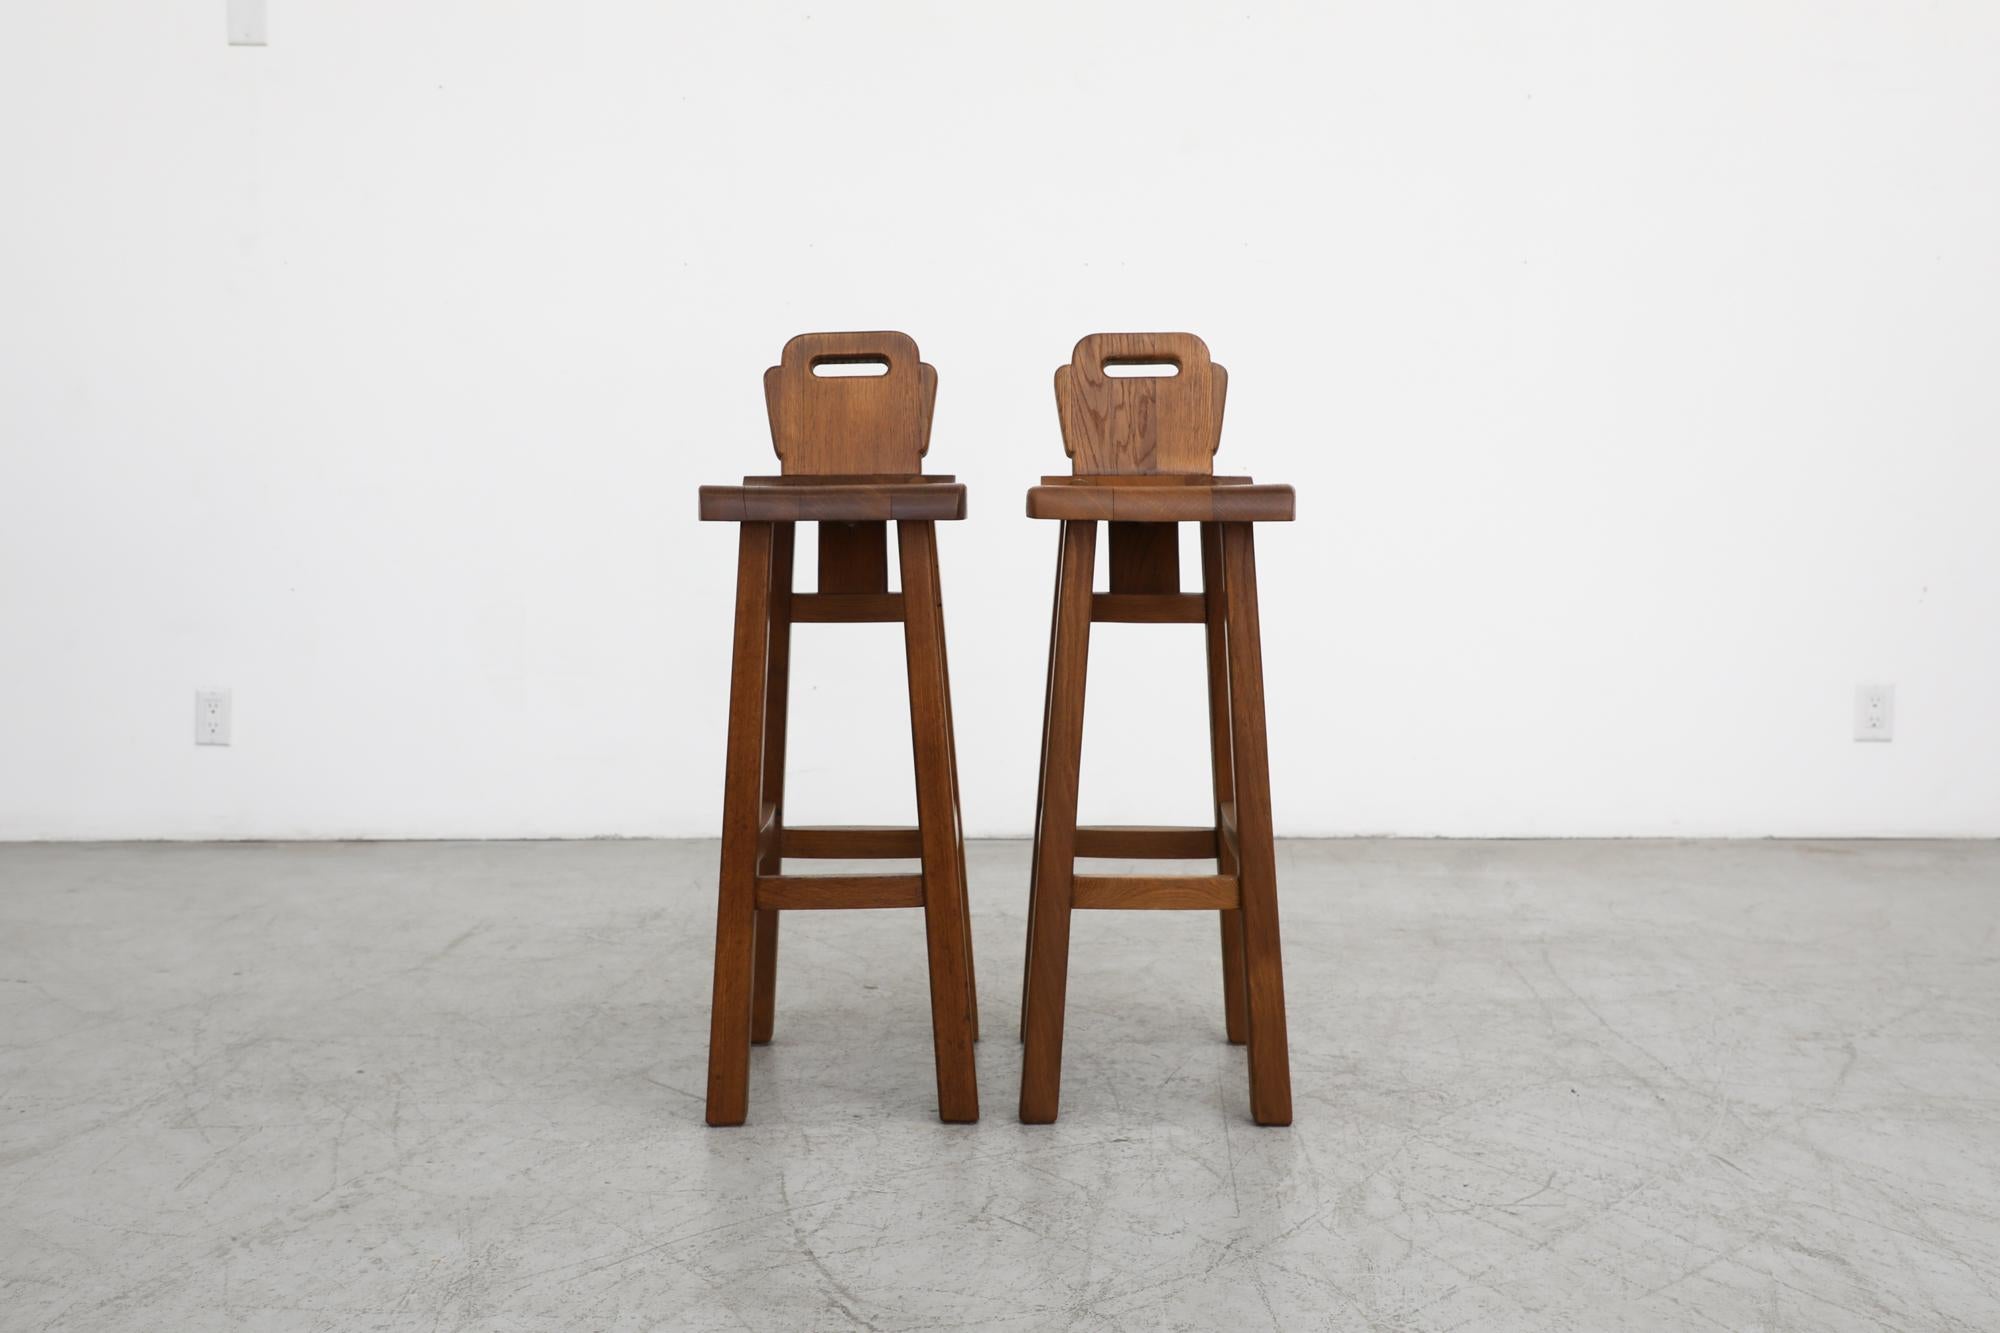 Handsome pair of De Puydt attributed Brutalist bars stools. Solid oak frames with beautiful carved details. In original condition with some visible wear and patina, consistent with their age and use. Set price. Similar stools also available in Set